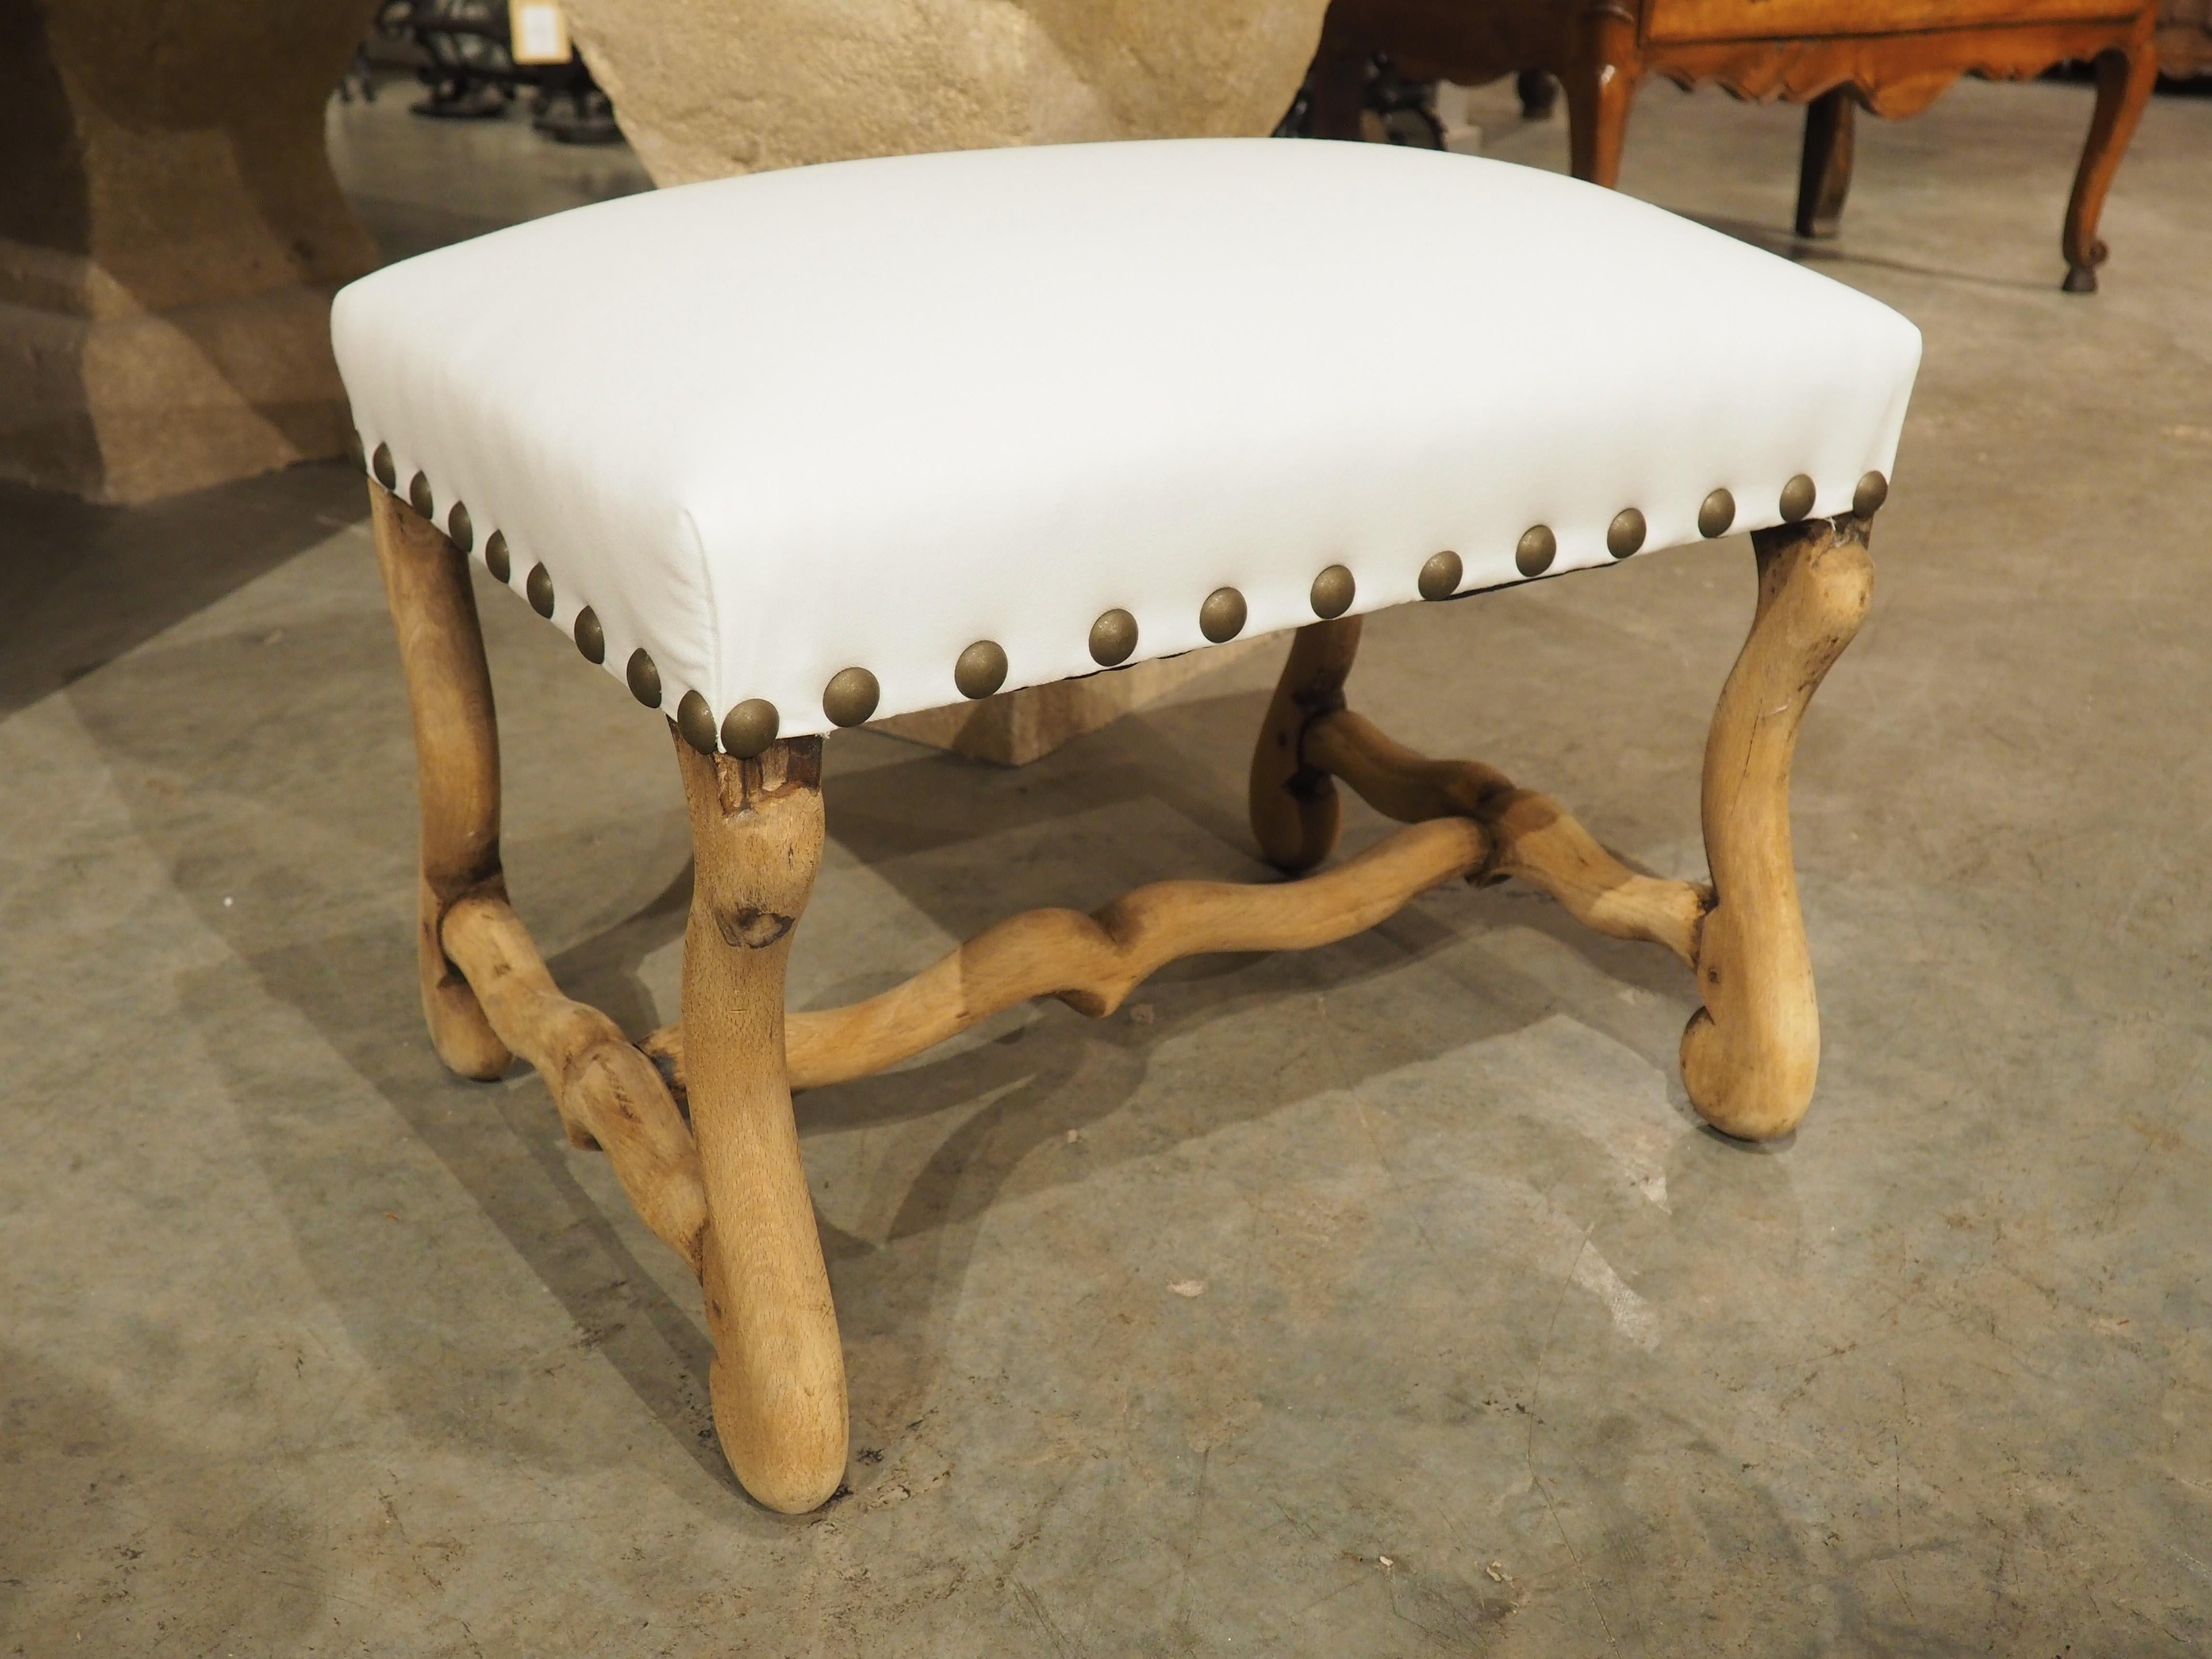 Bleached French Os De Mouton Tabouret Stool, White Cotton Upholstery, C. 1900 For Sale 1